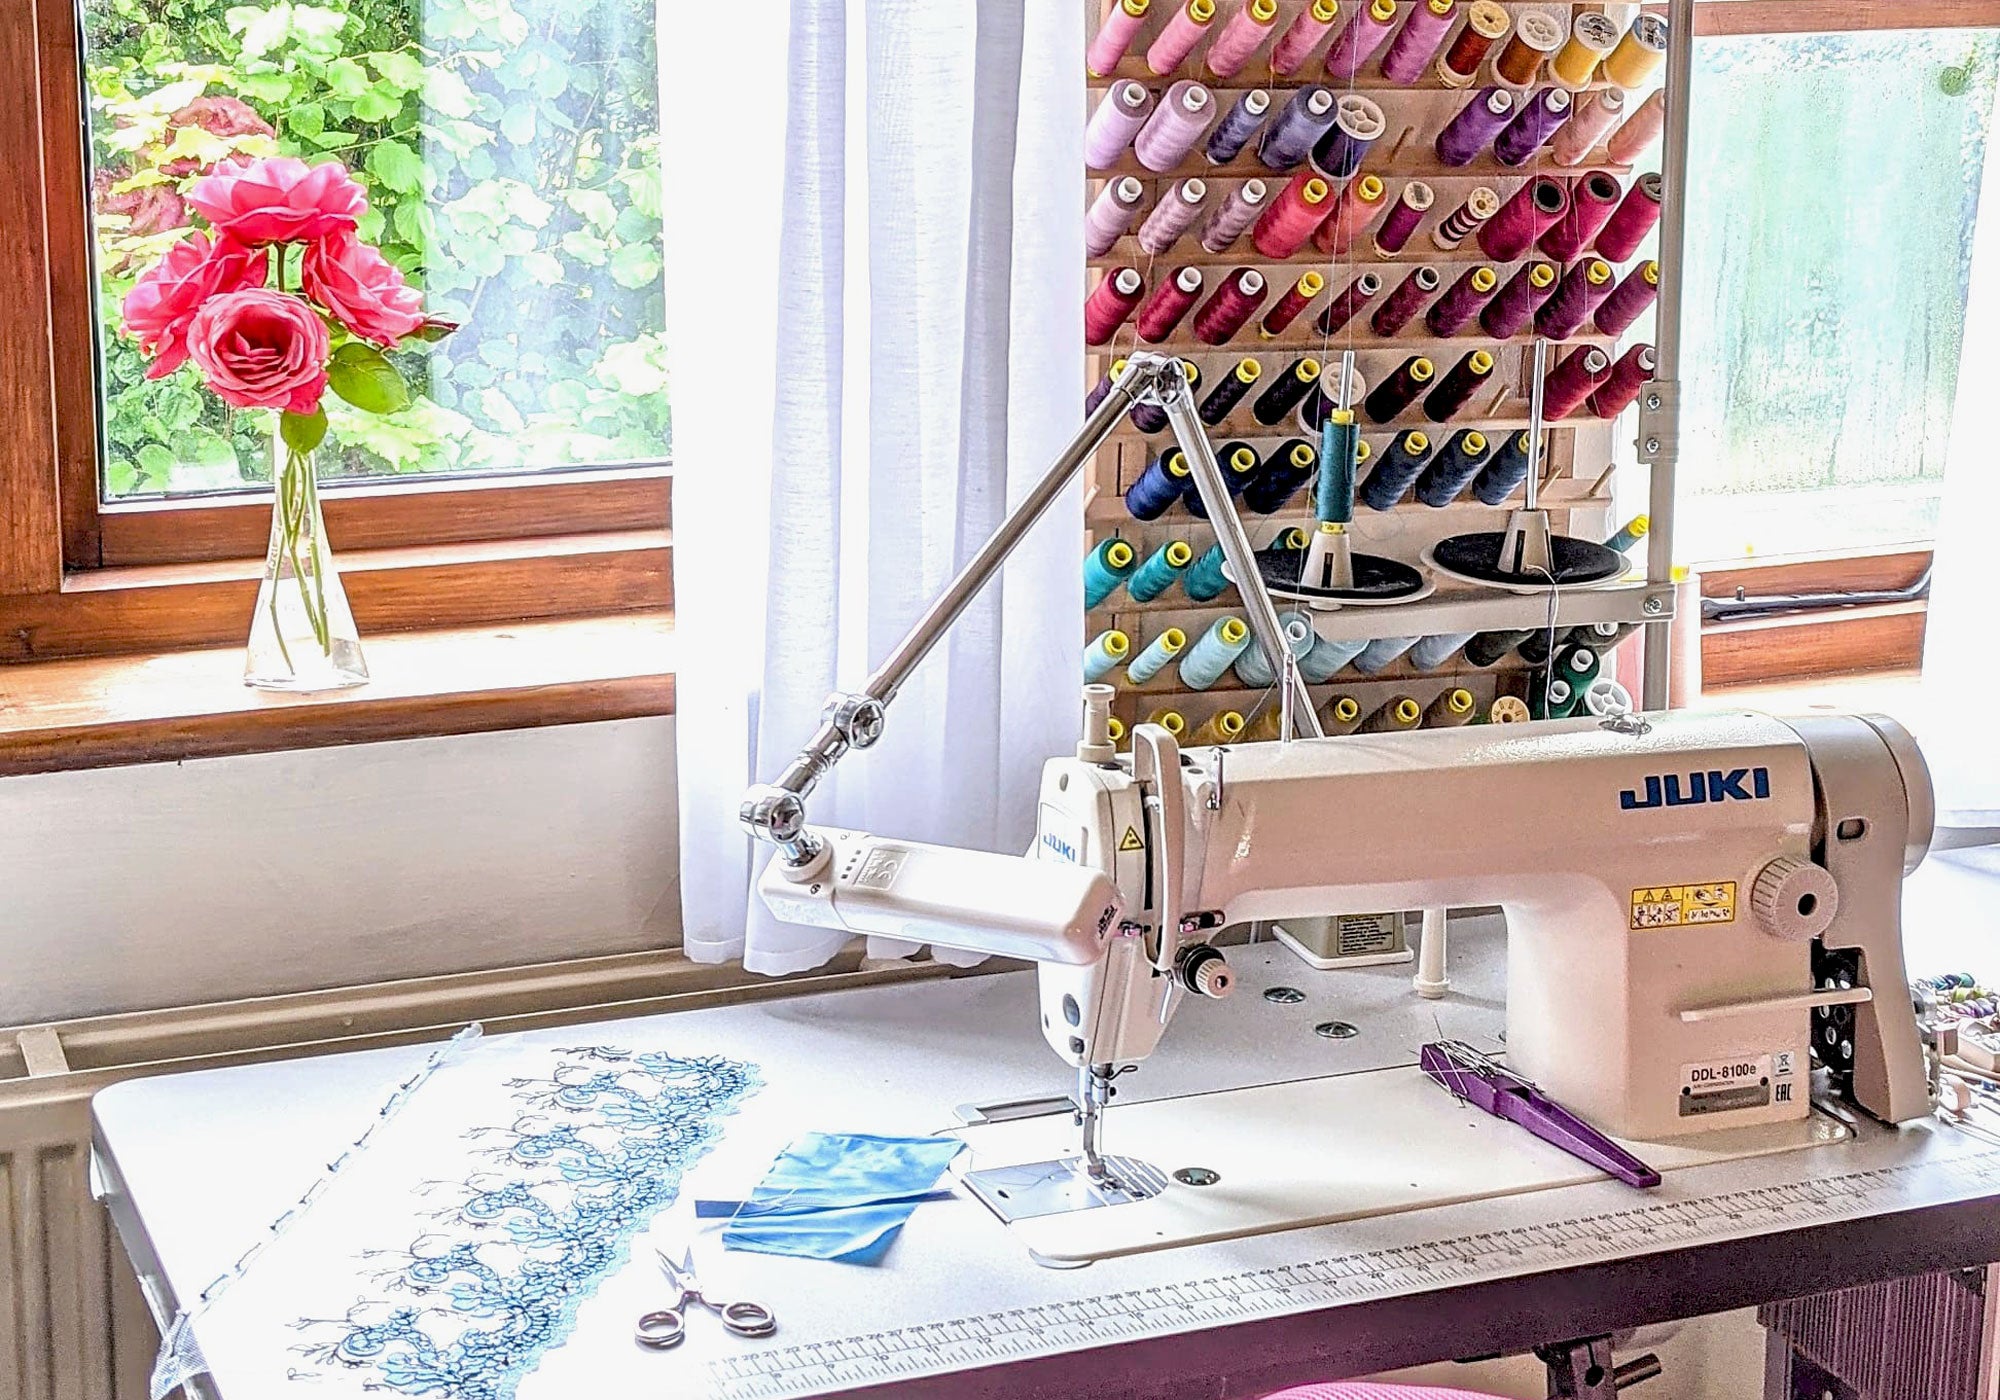 Sewing room for Angela Friedman's ethical manufacture of lingerie